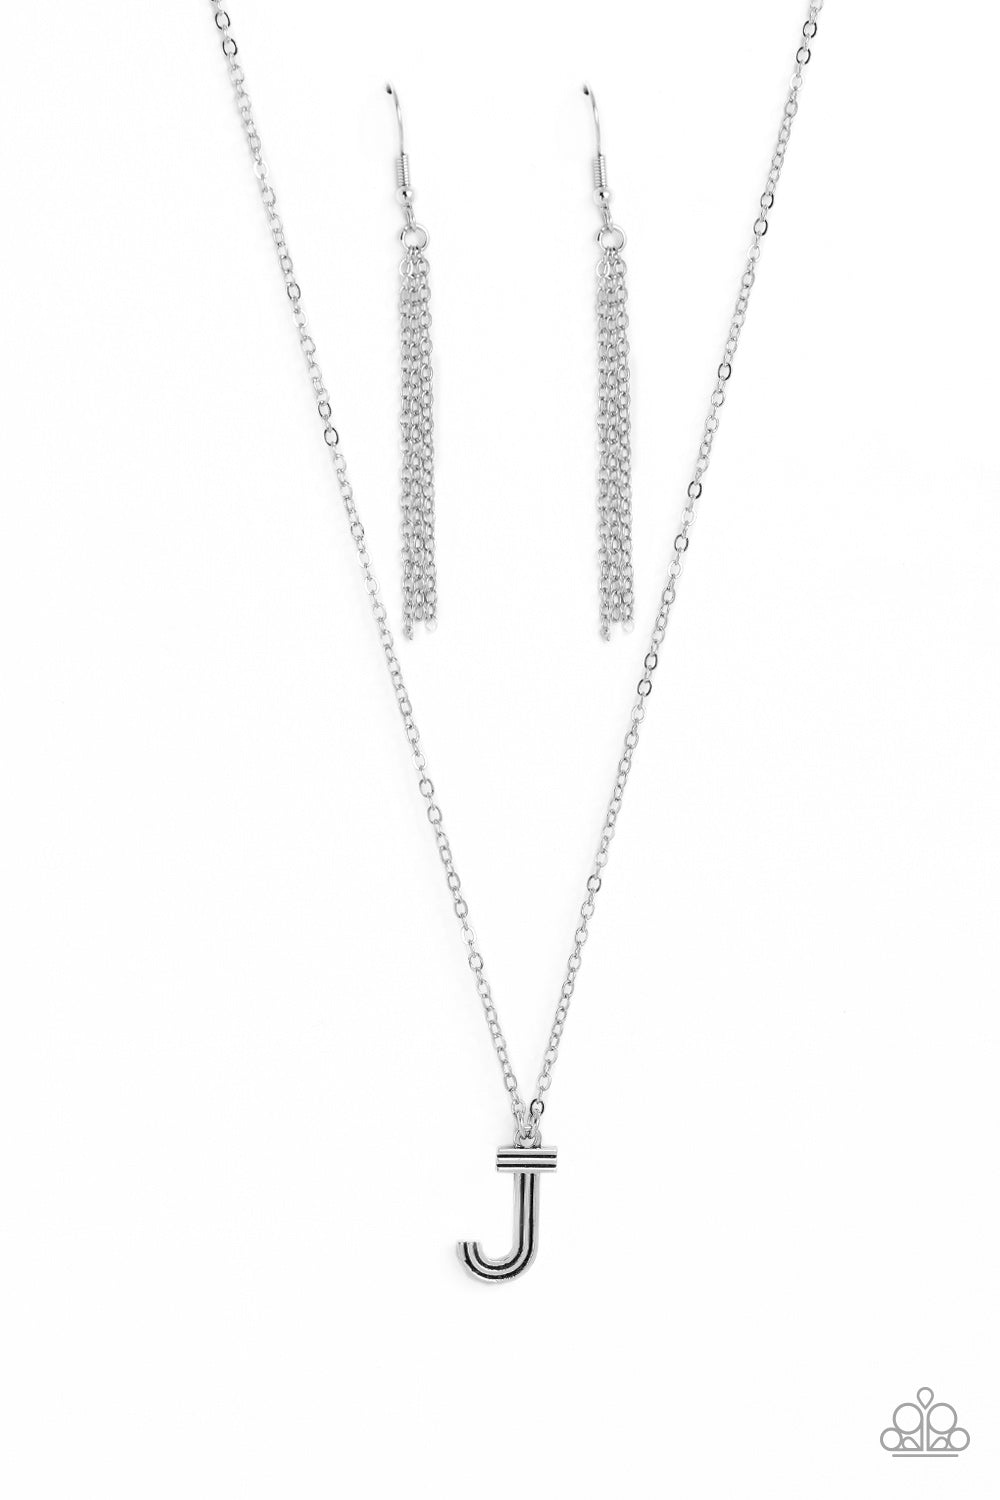 Paparazzi Leave Your Initials - Silver - J Necklace